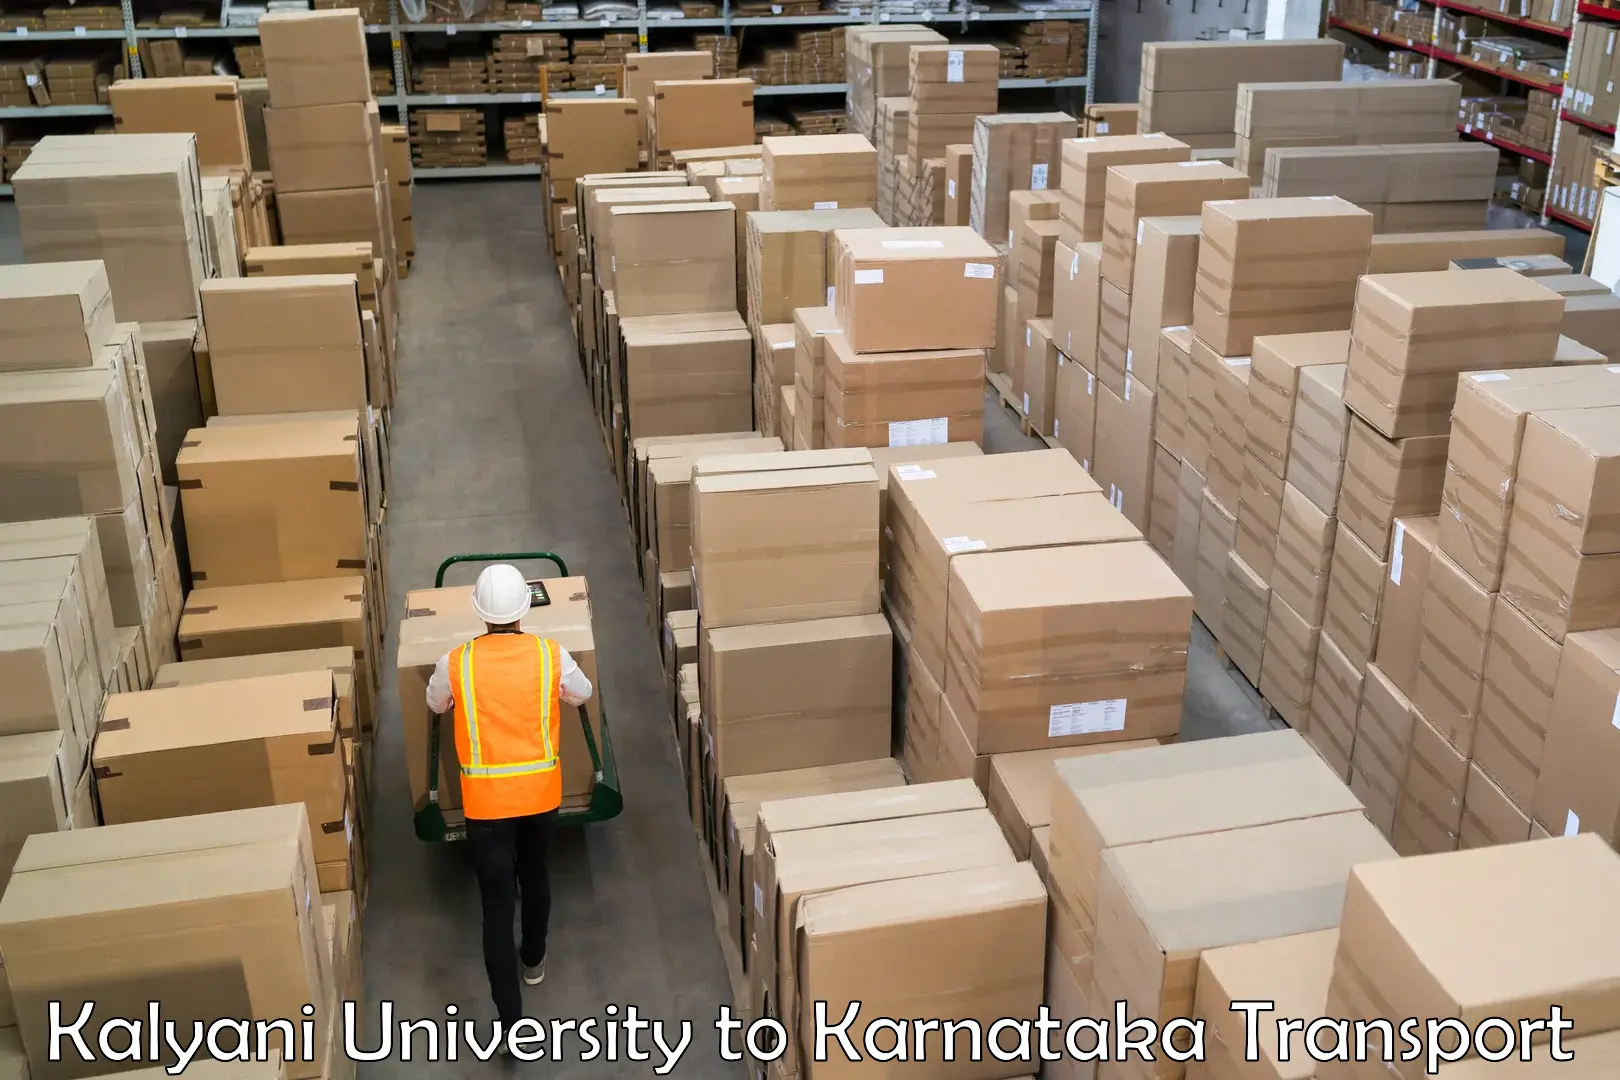 Package delivery services Kalyani University to Kollegal